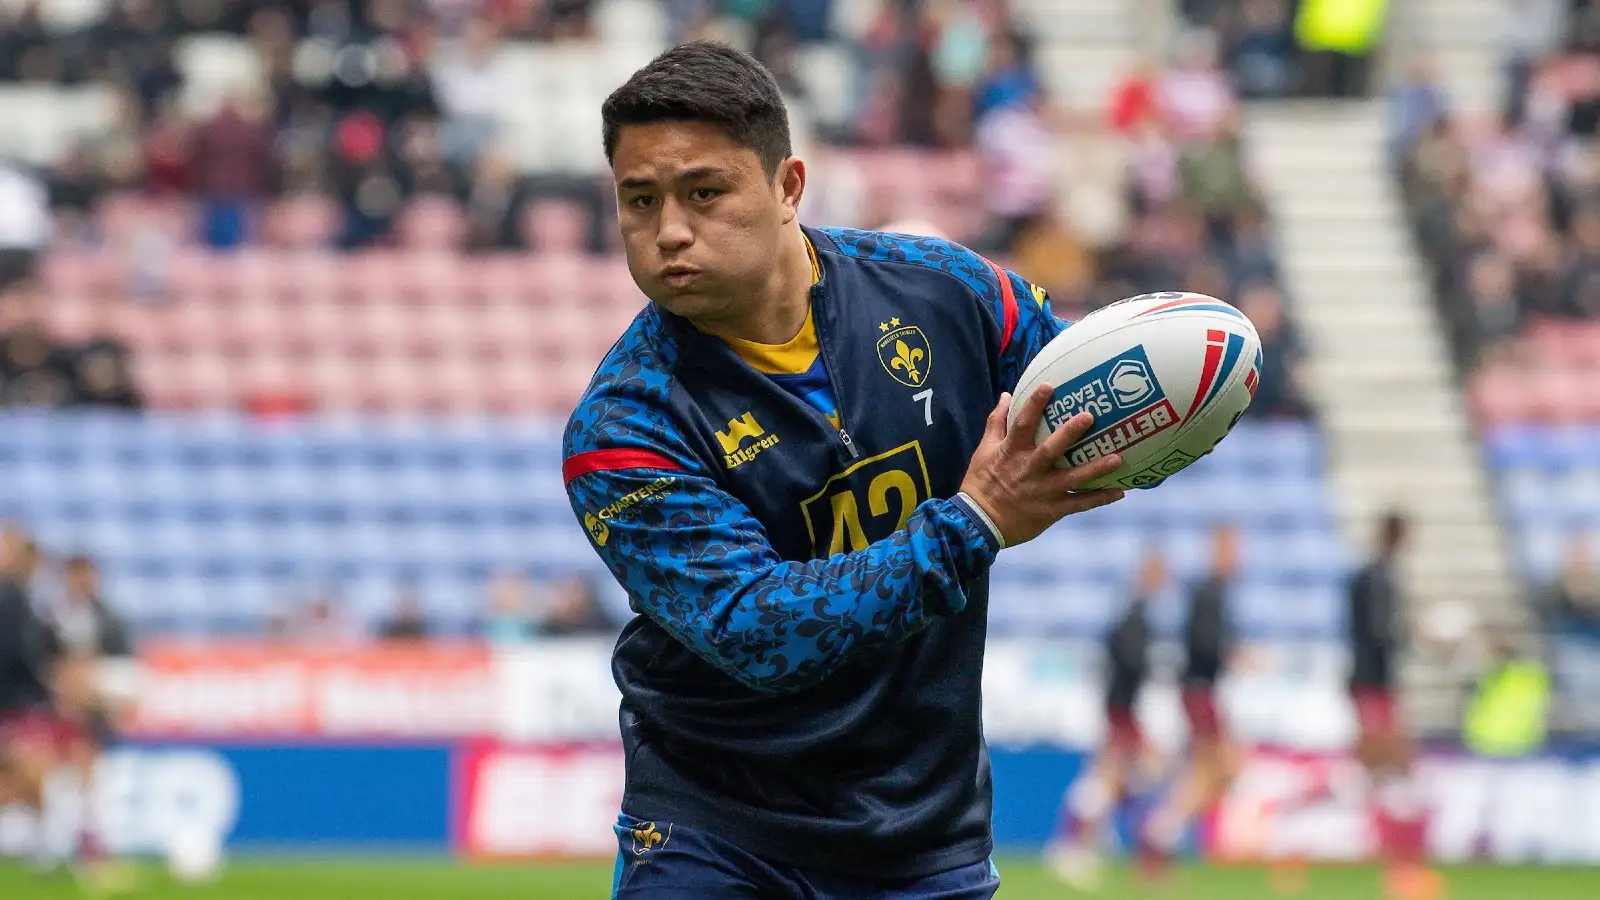 Wakefield boss hints at Mason Lino decision amidst Leeds speculation